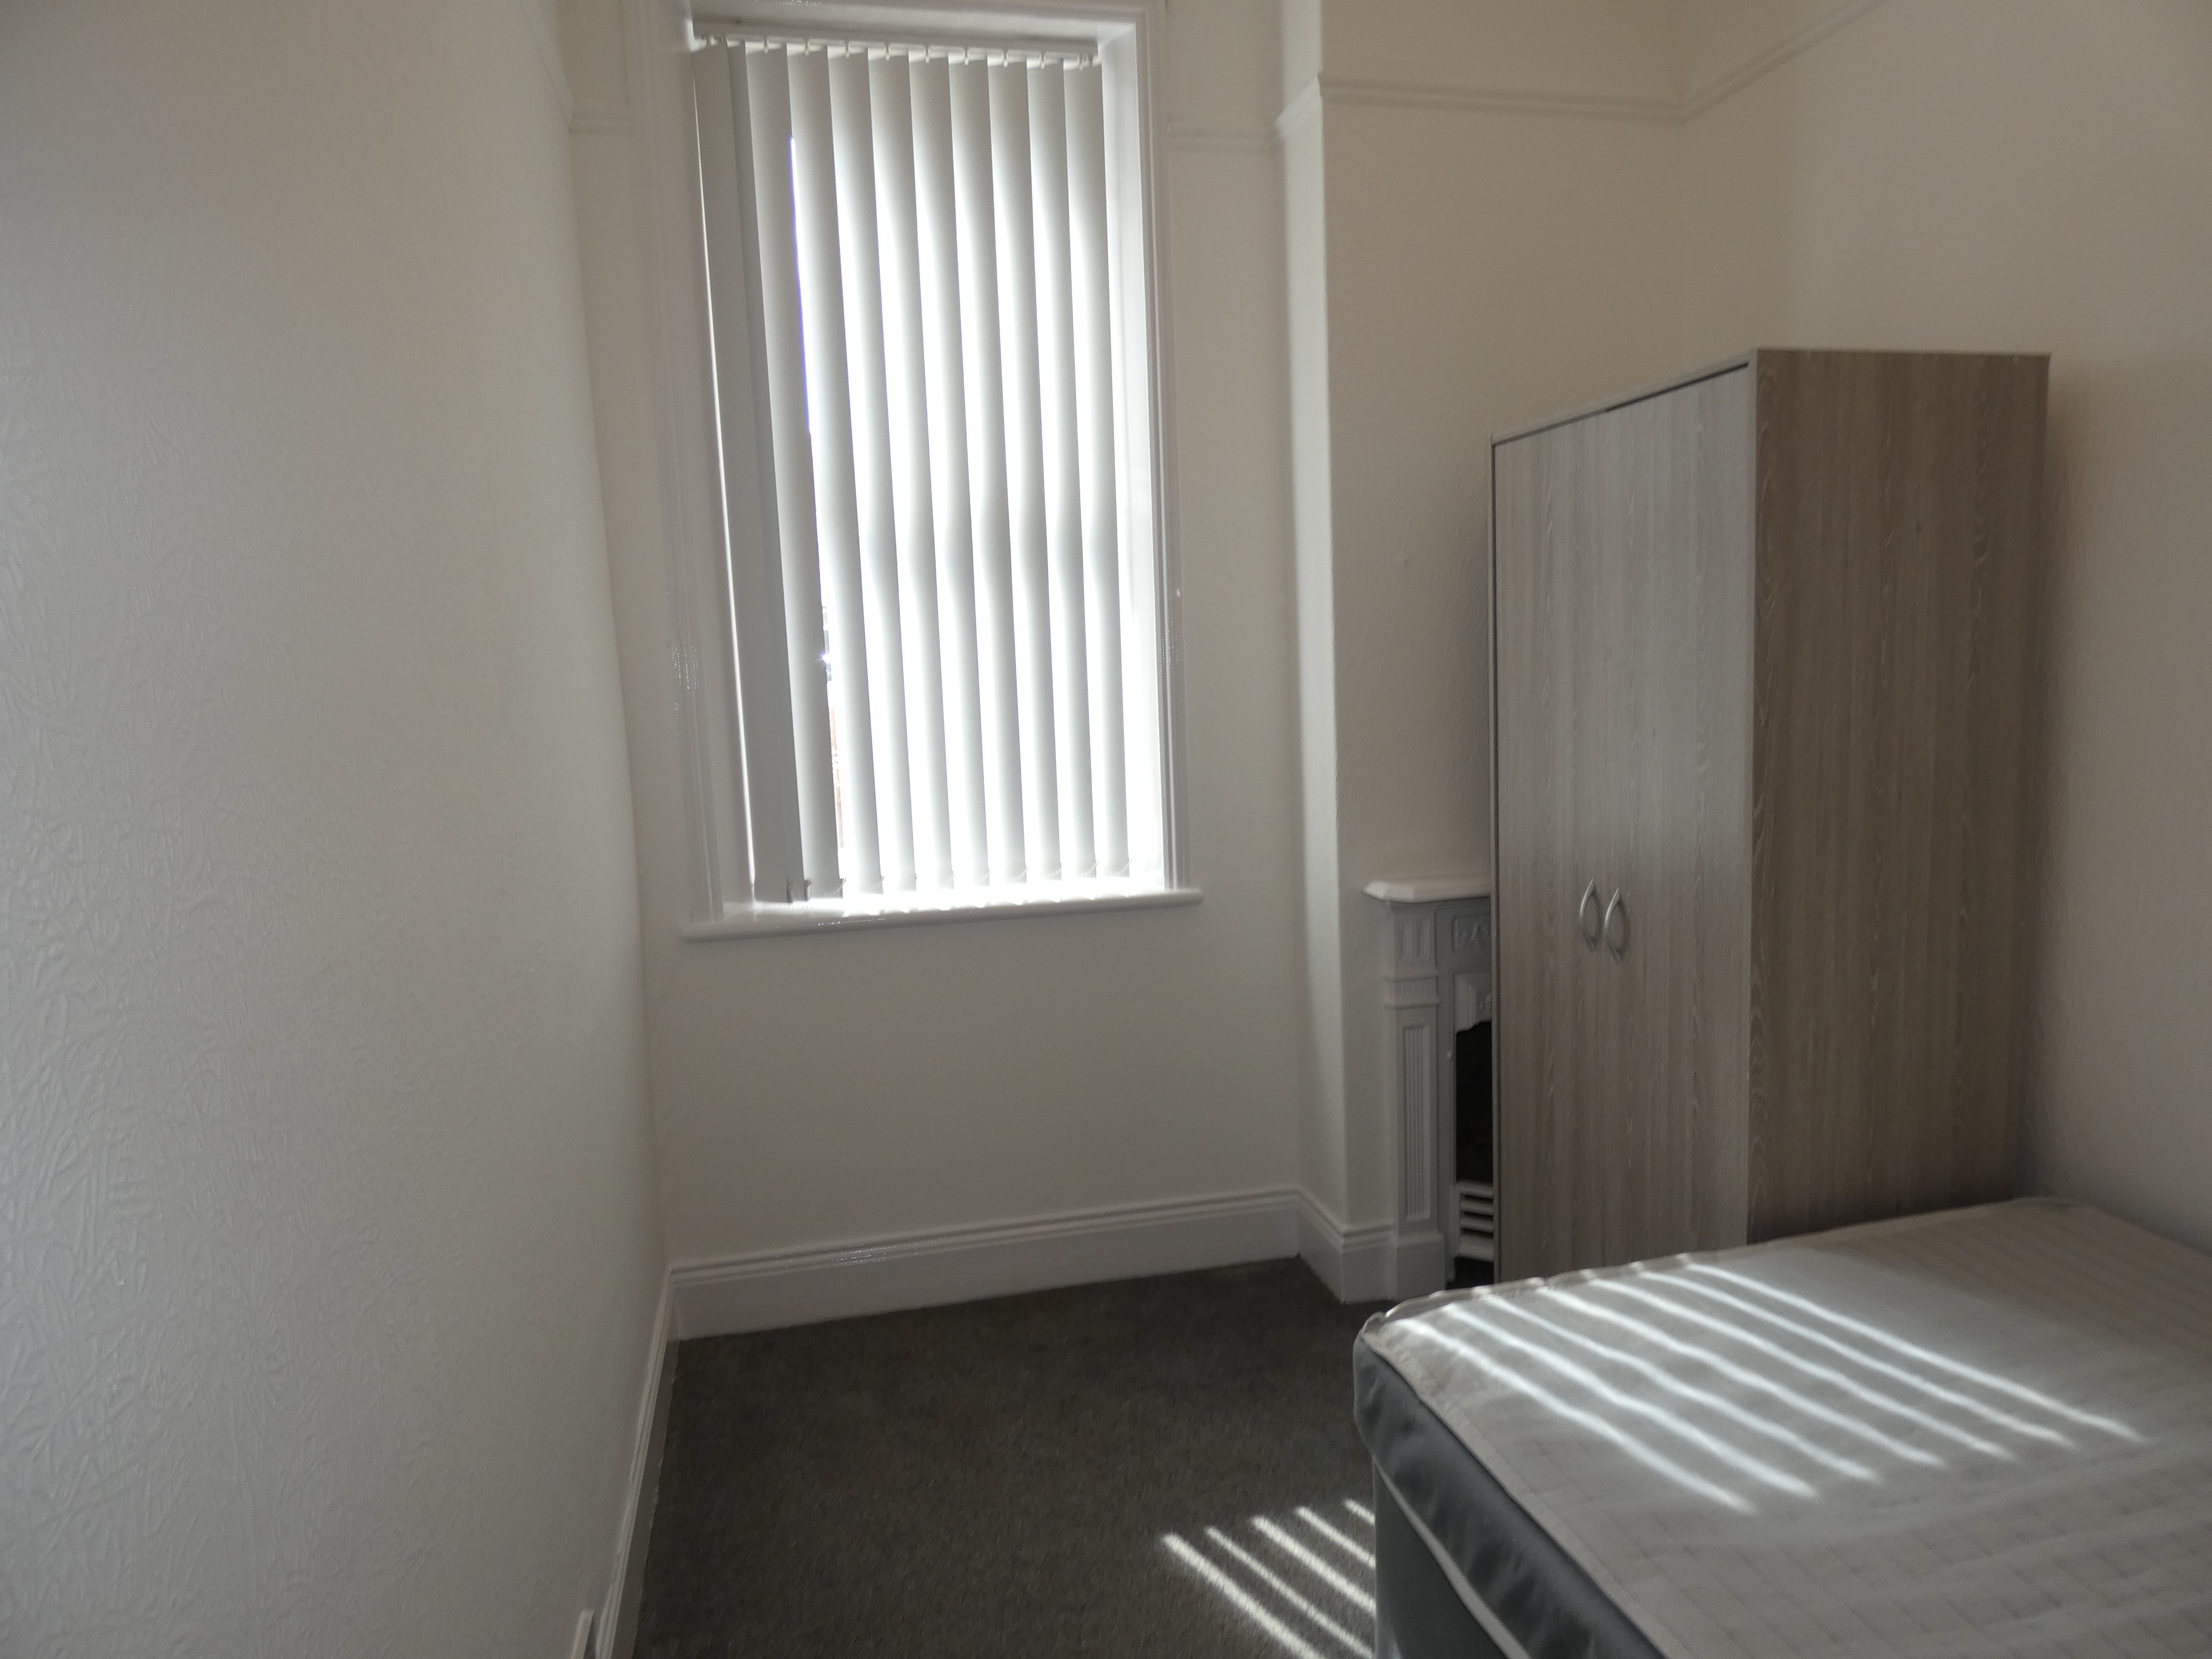 2 bed flat to rent in Cartington Terrace, Newcastle upon tyne  - Property Image 5